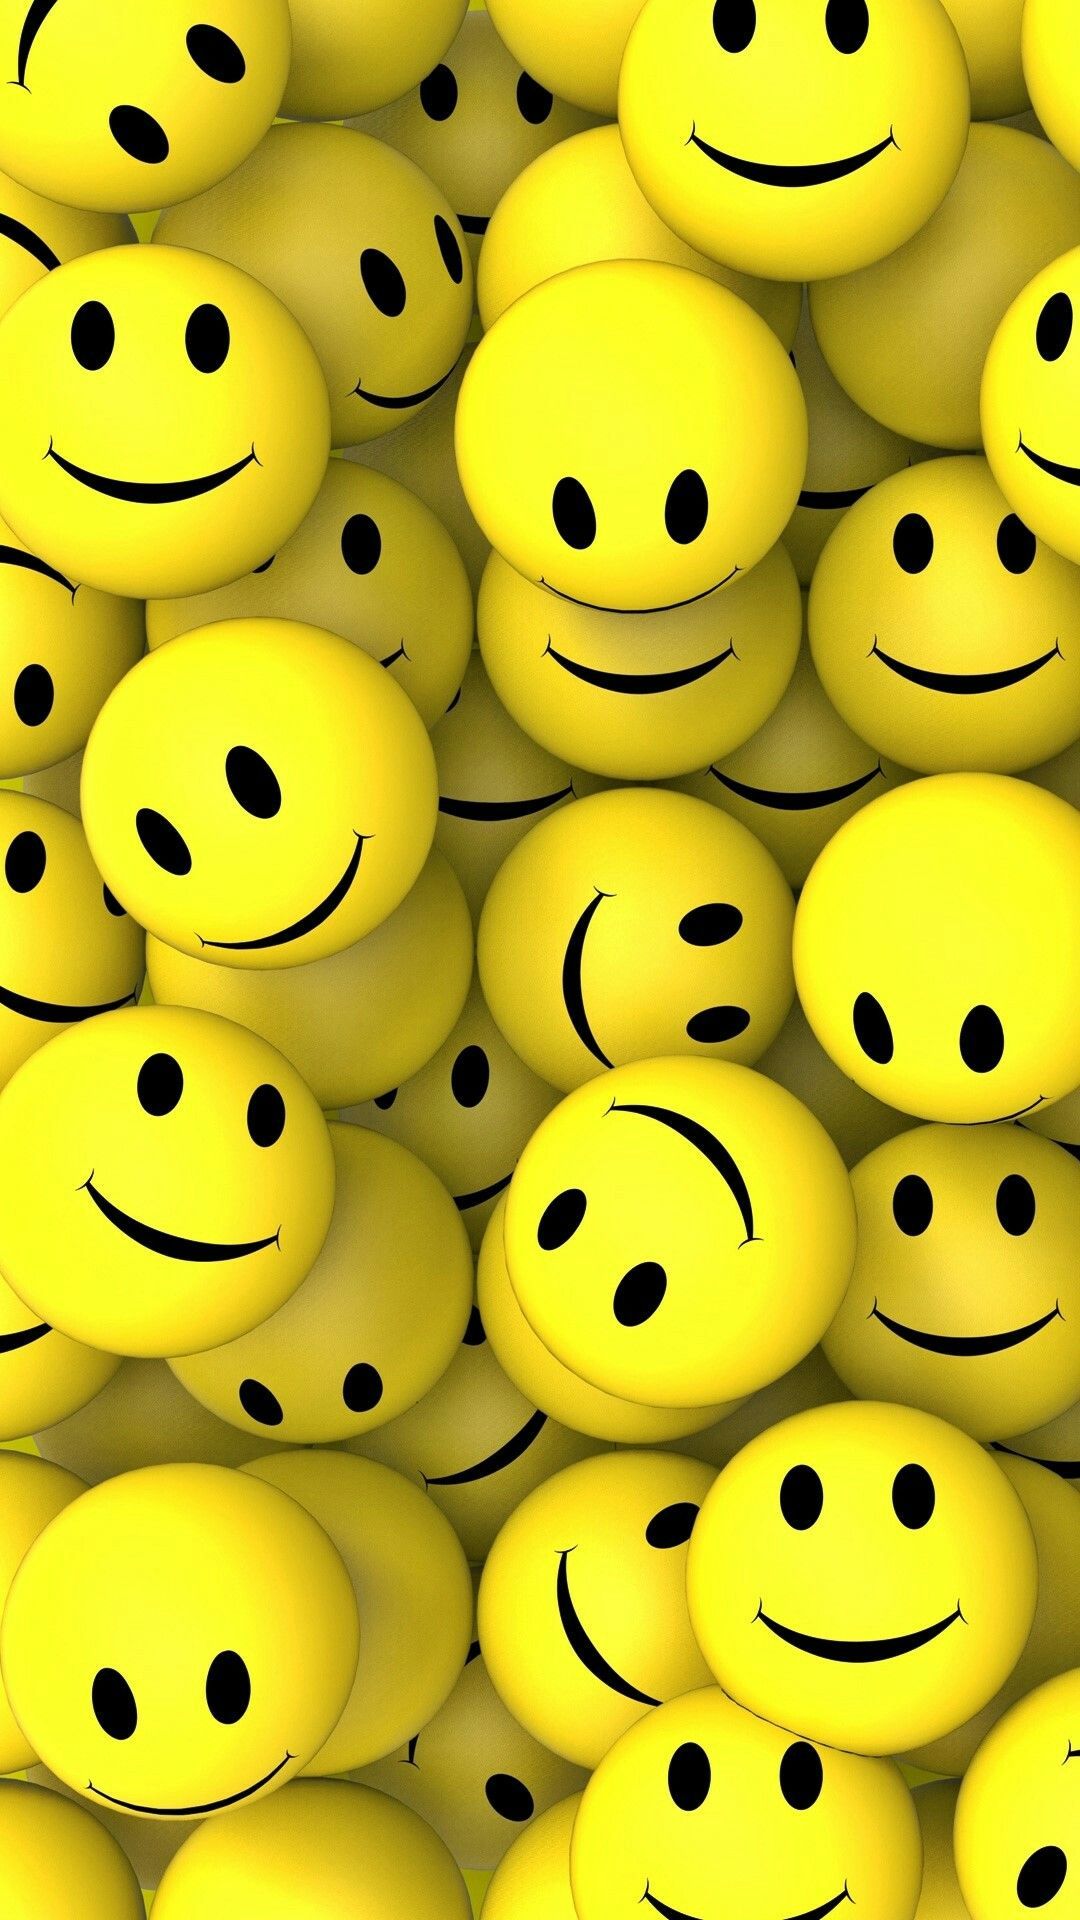 IPhone wallpaper with smiley faces. - Smile